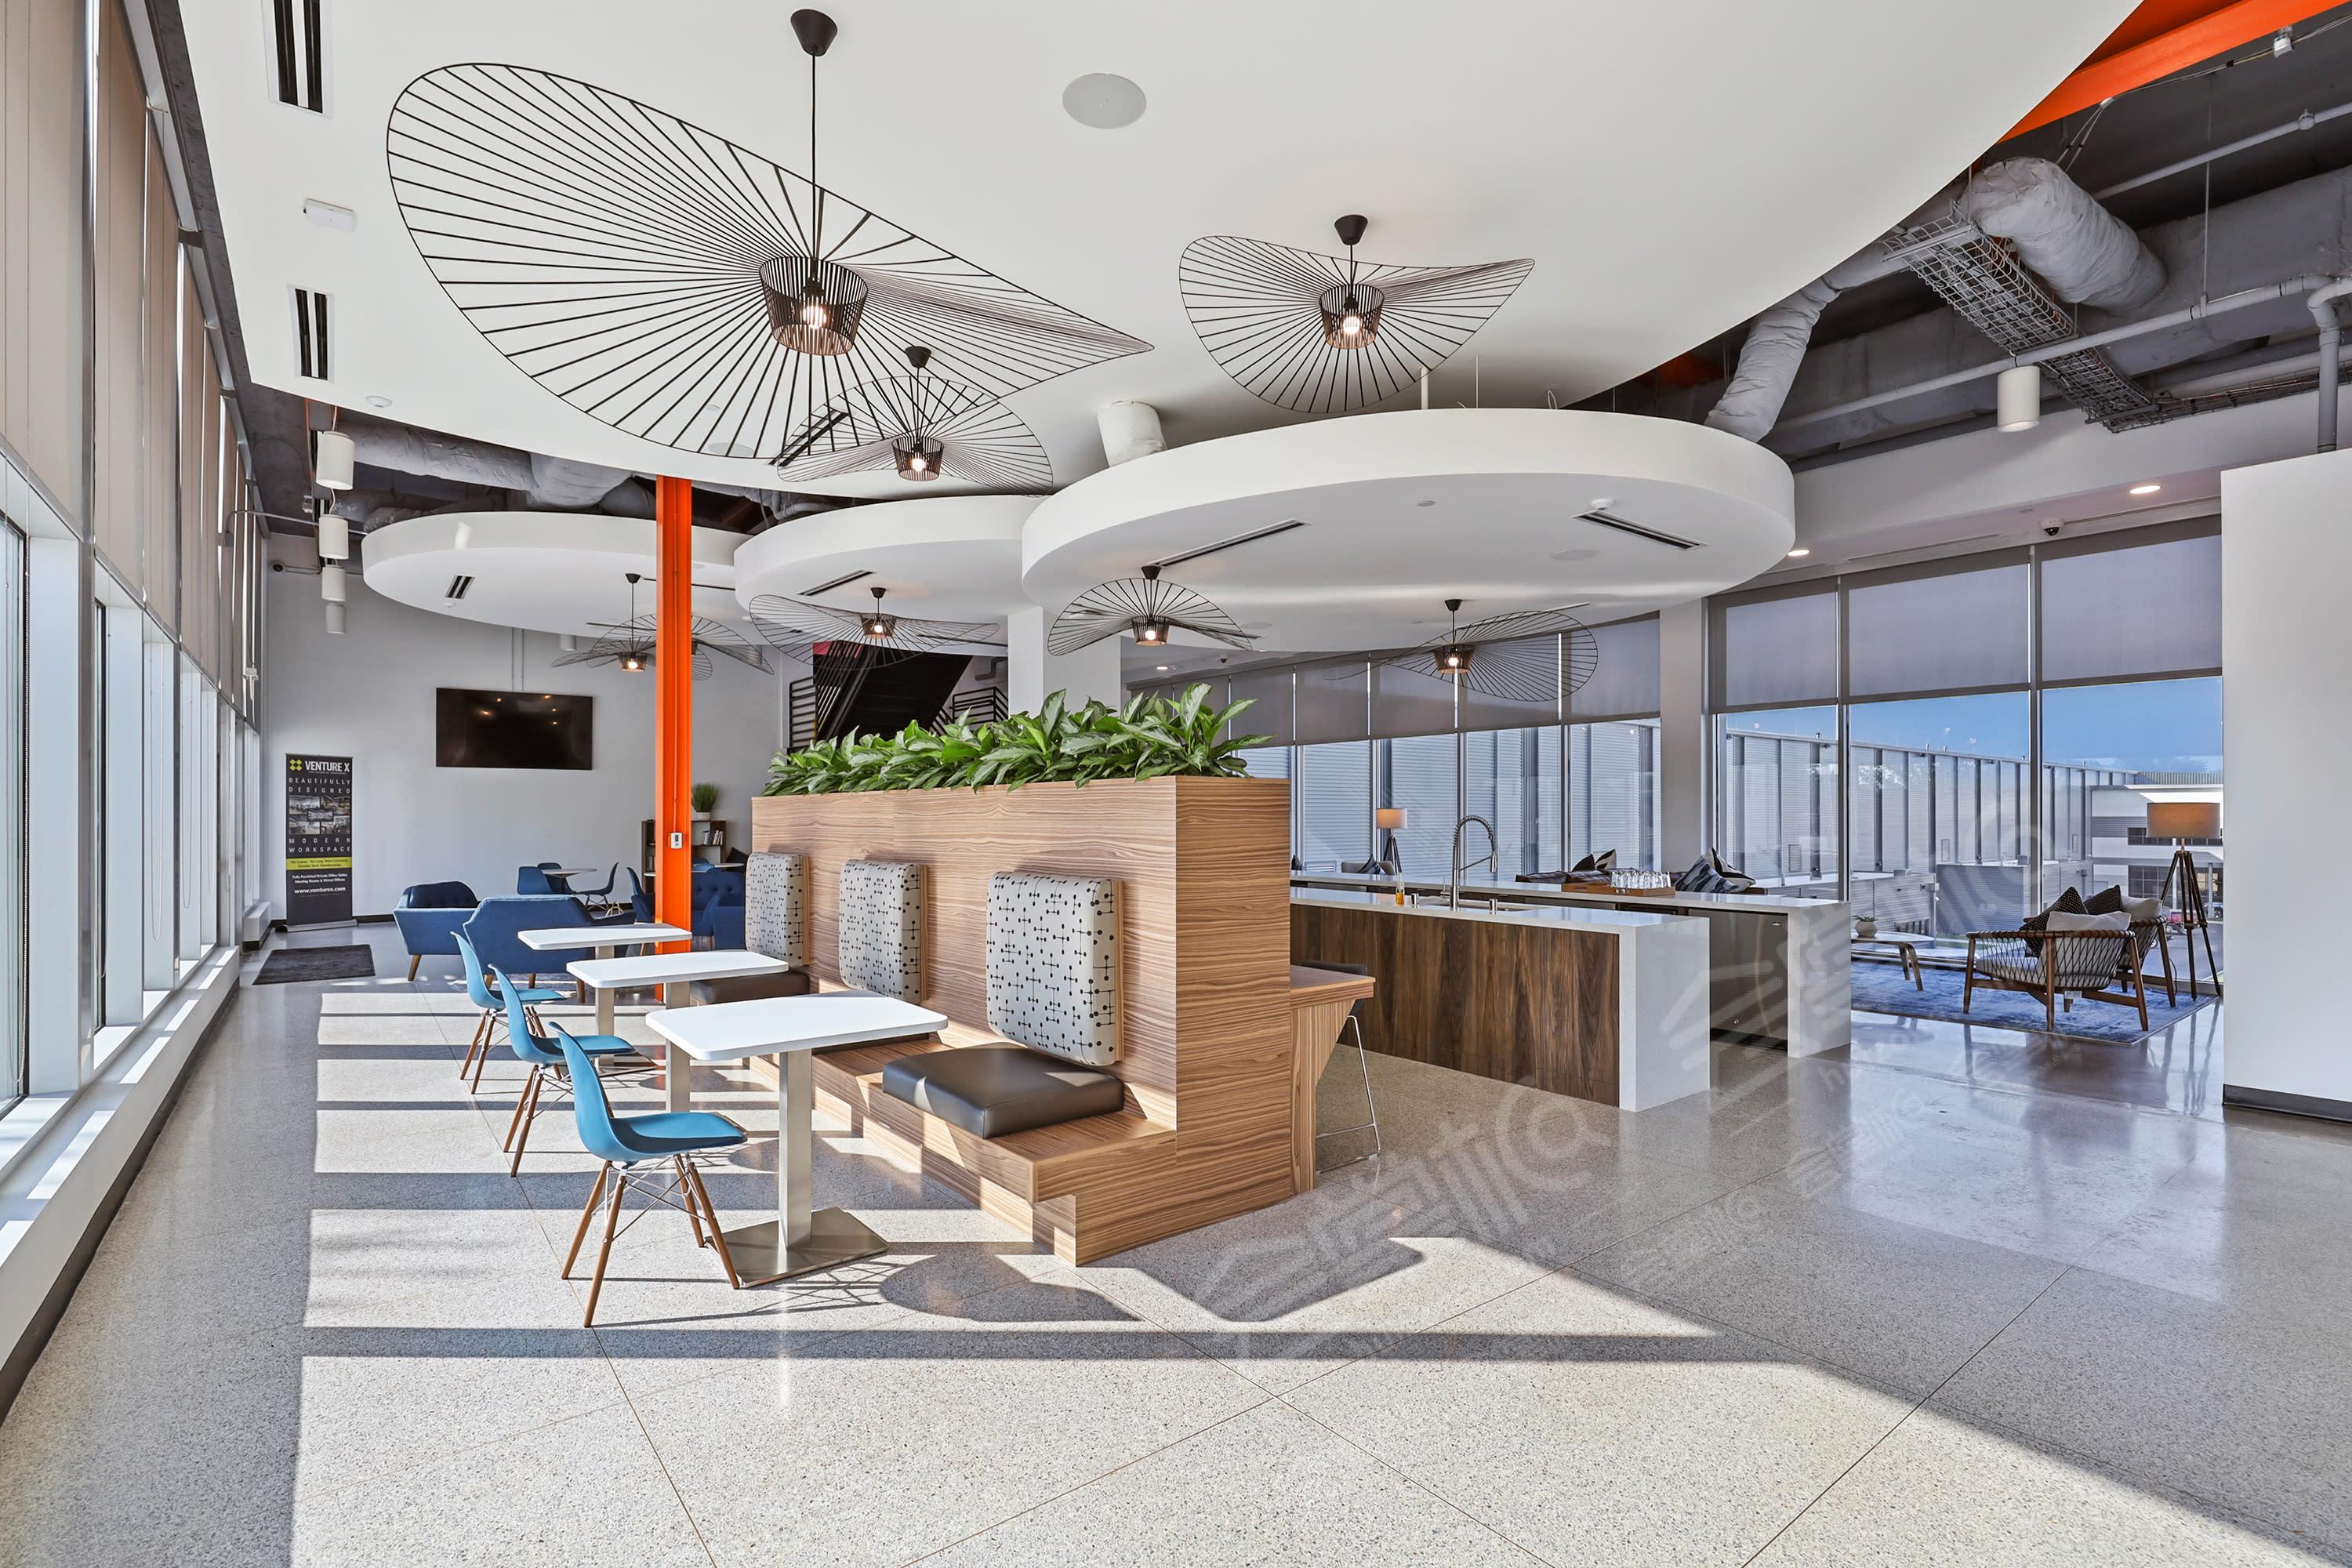 Mid Century Modern meets Coworking with direct views of Dallas Love Field